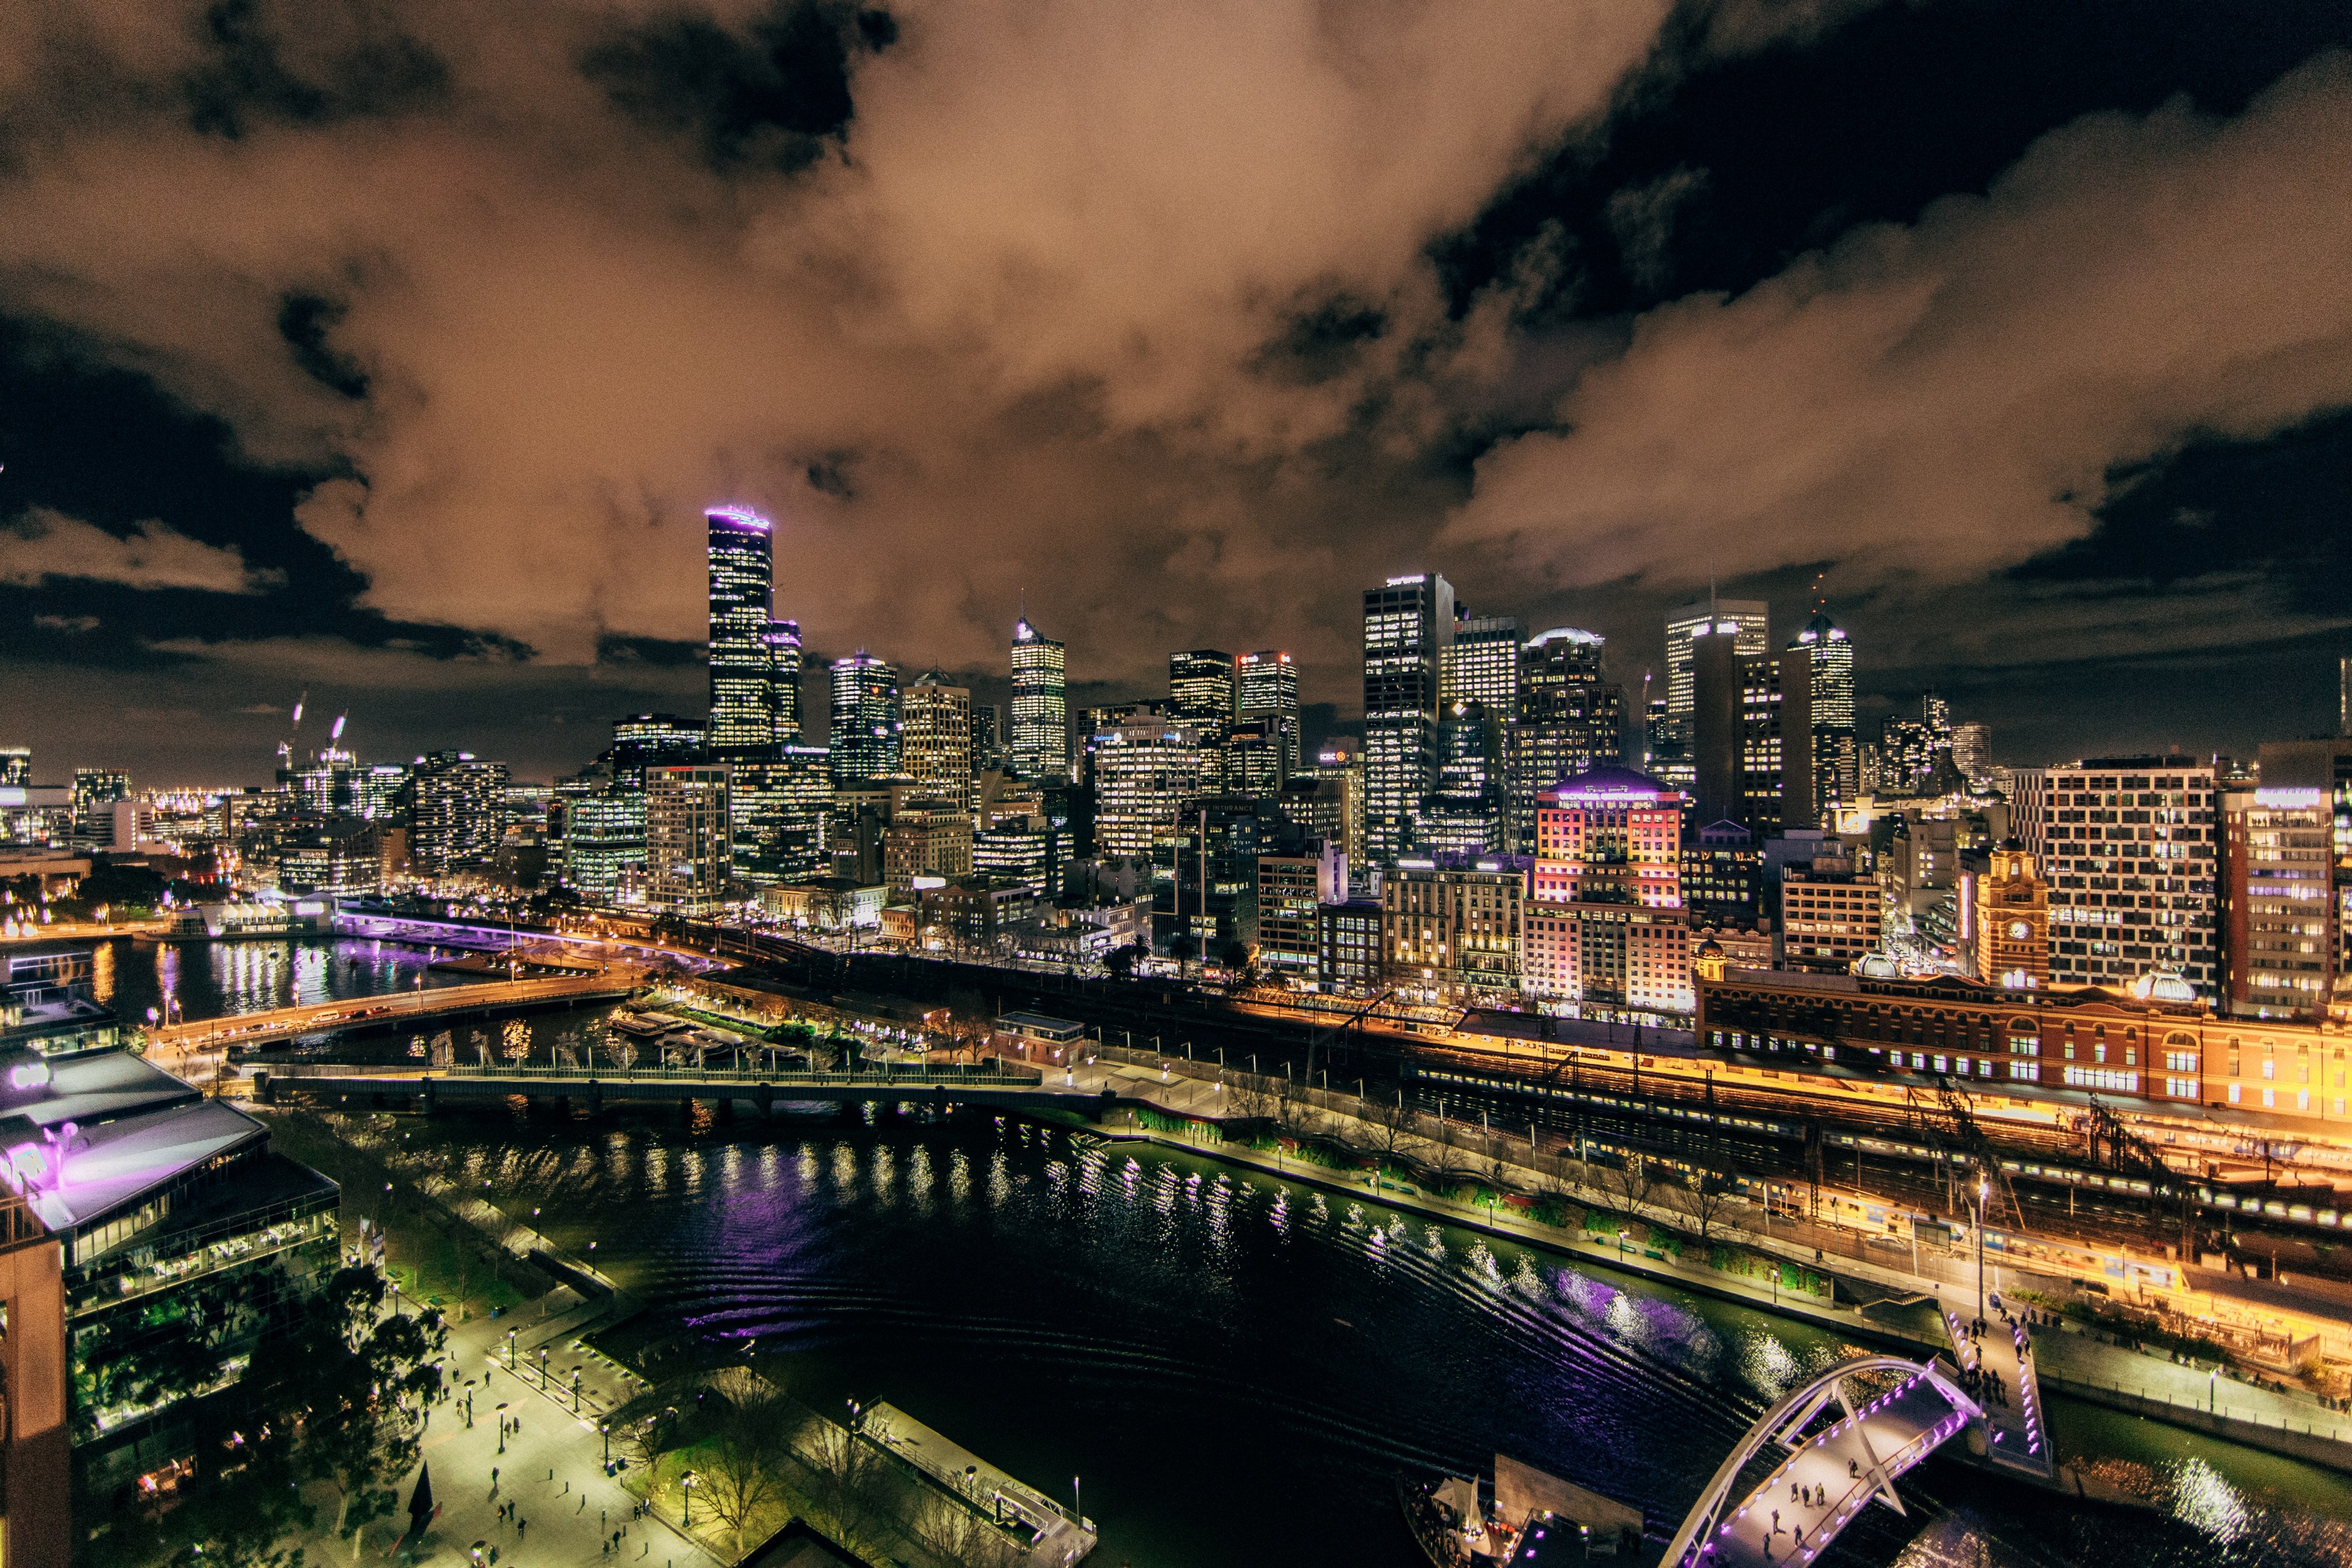 Wallpaper id an urban panorama on the banks of a river in melbourne at night urban river banks k wallpaper free download